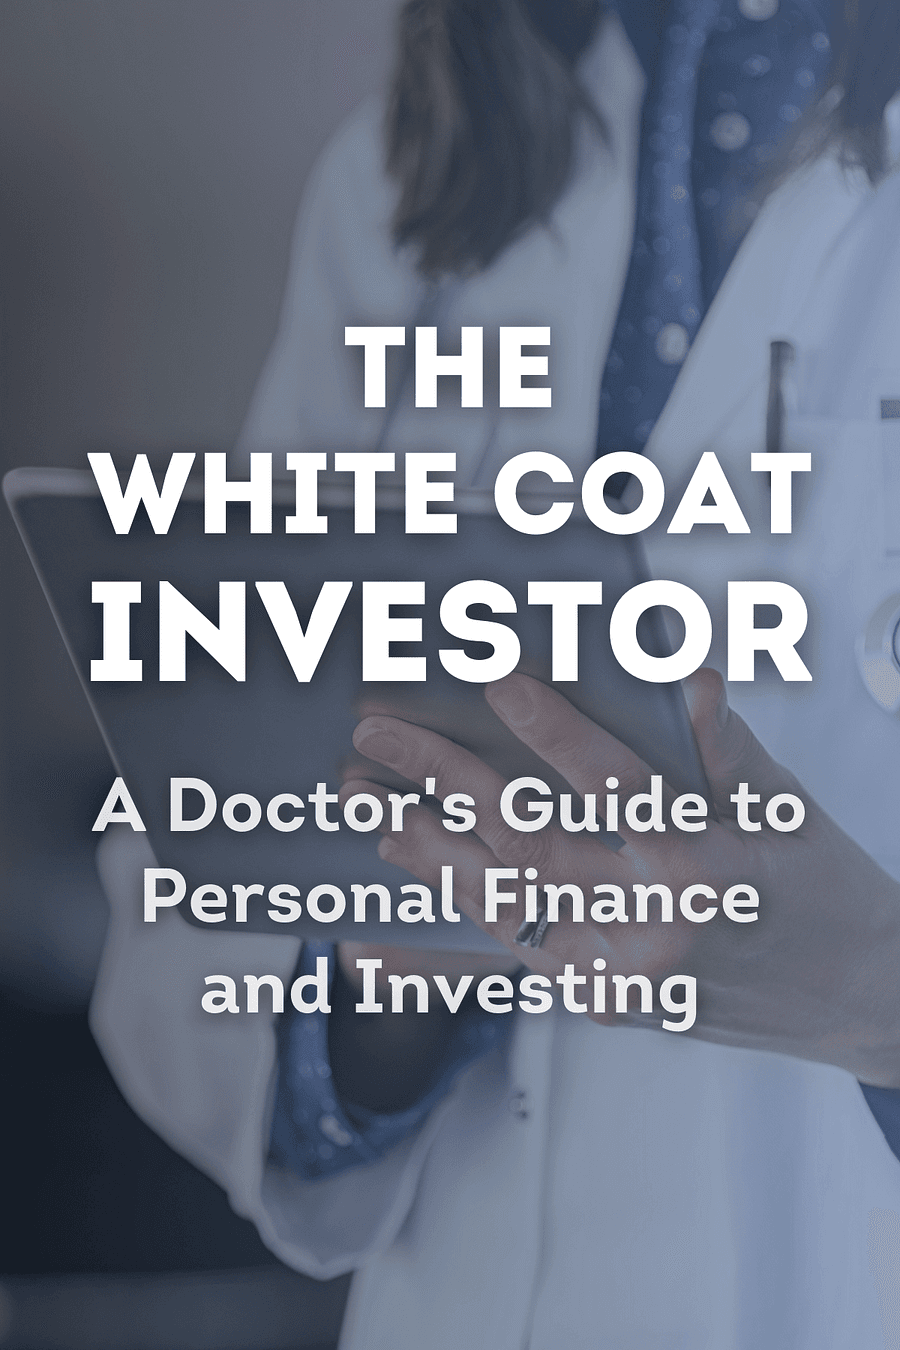 The White Coat Investor by Dr. James M Dahle MD - Book Summary